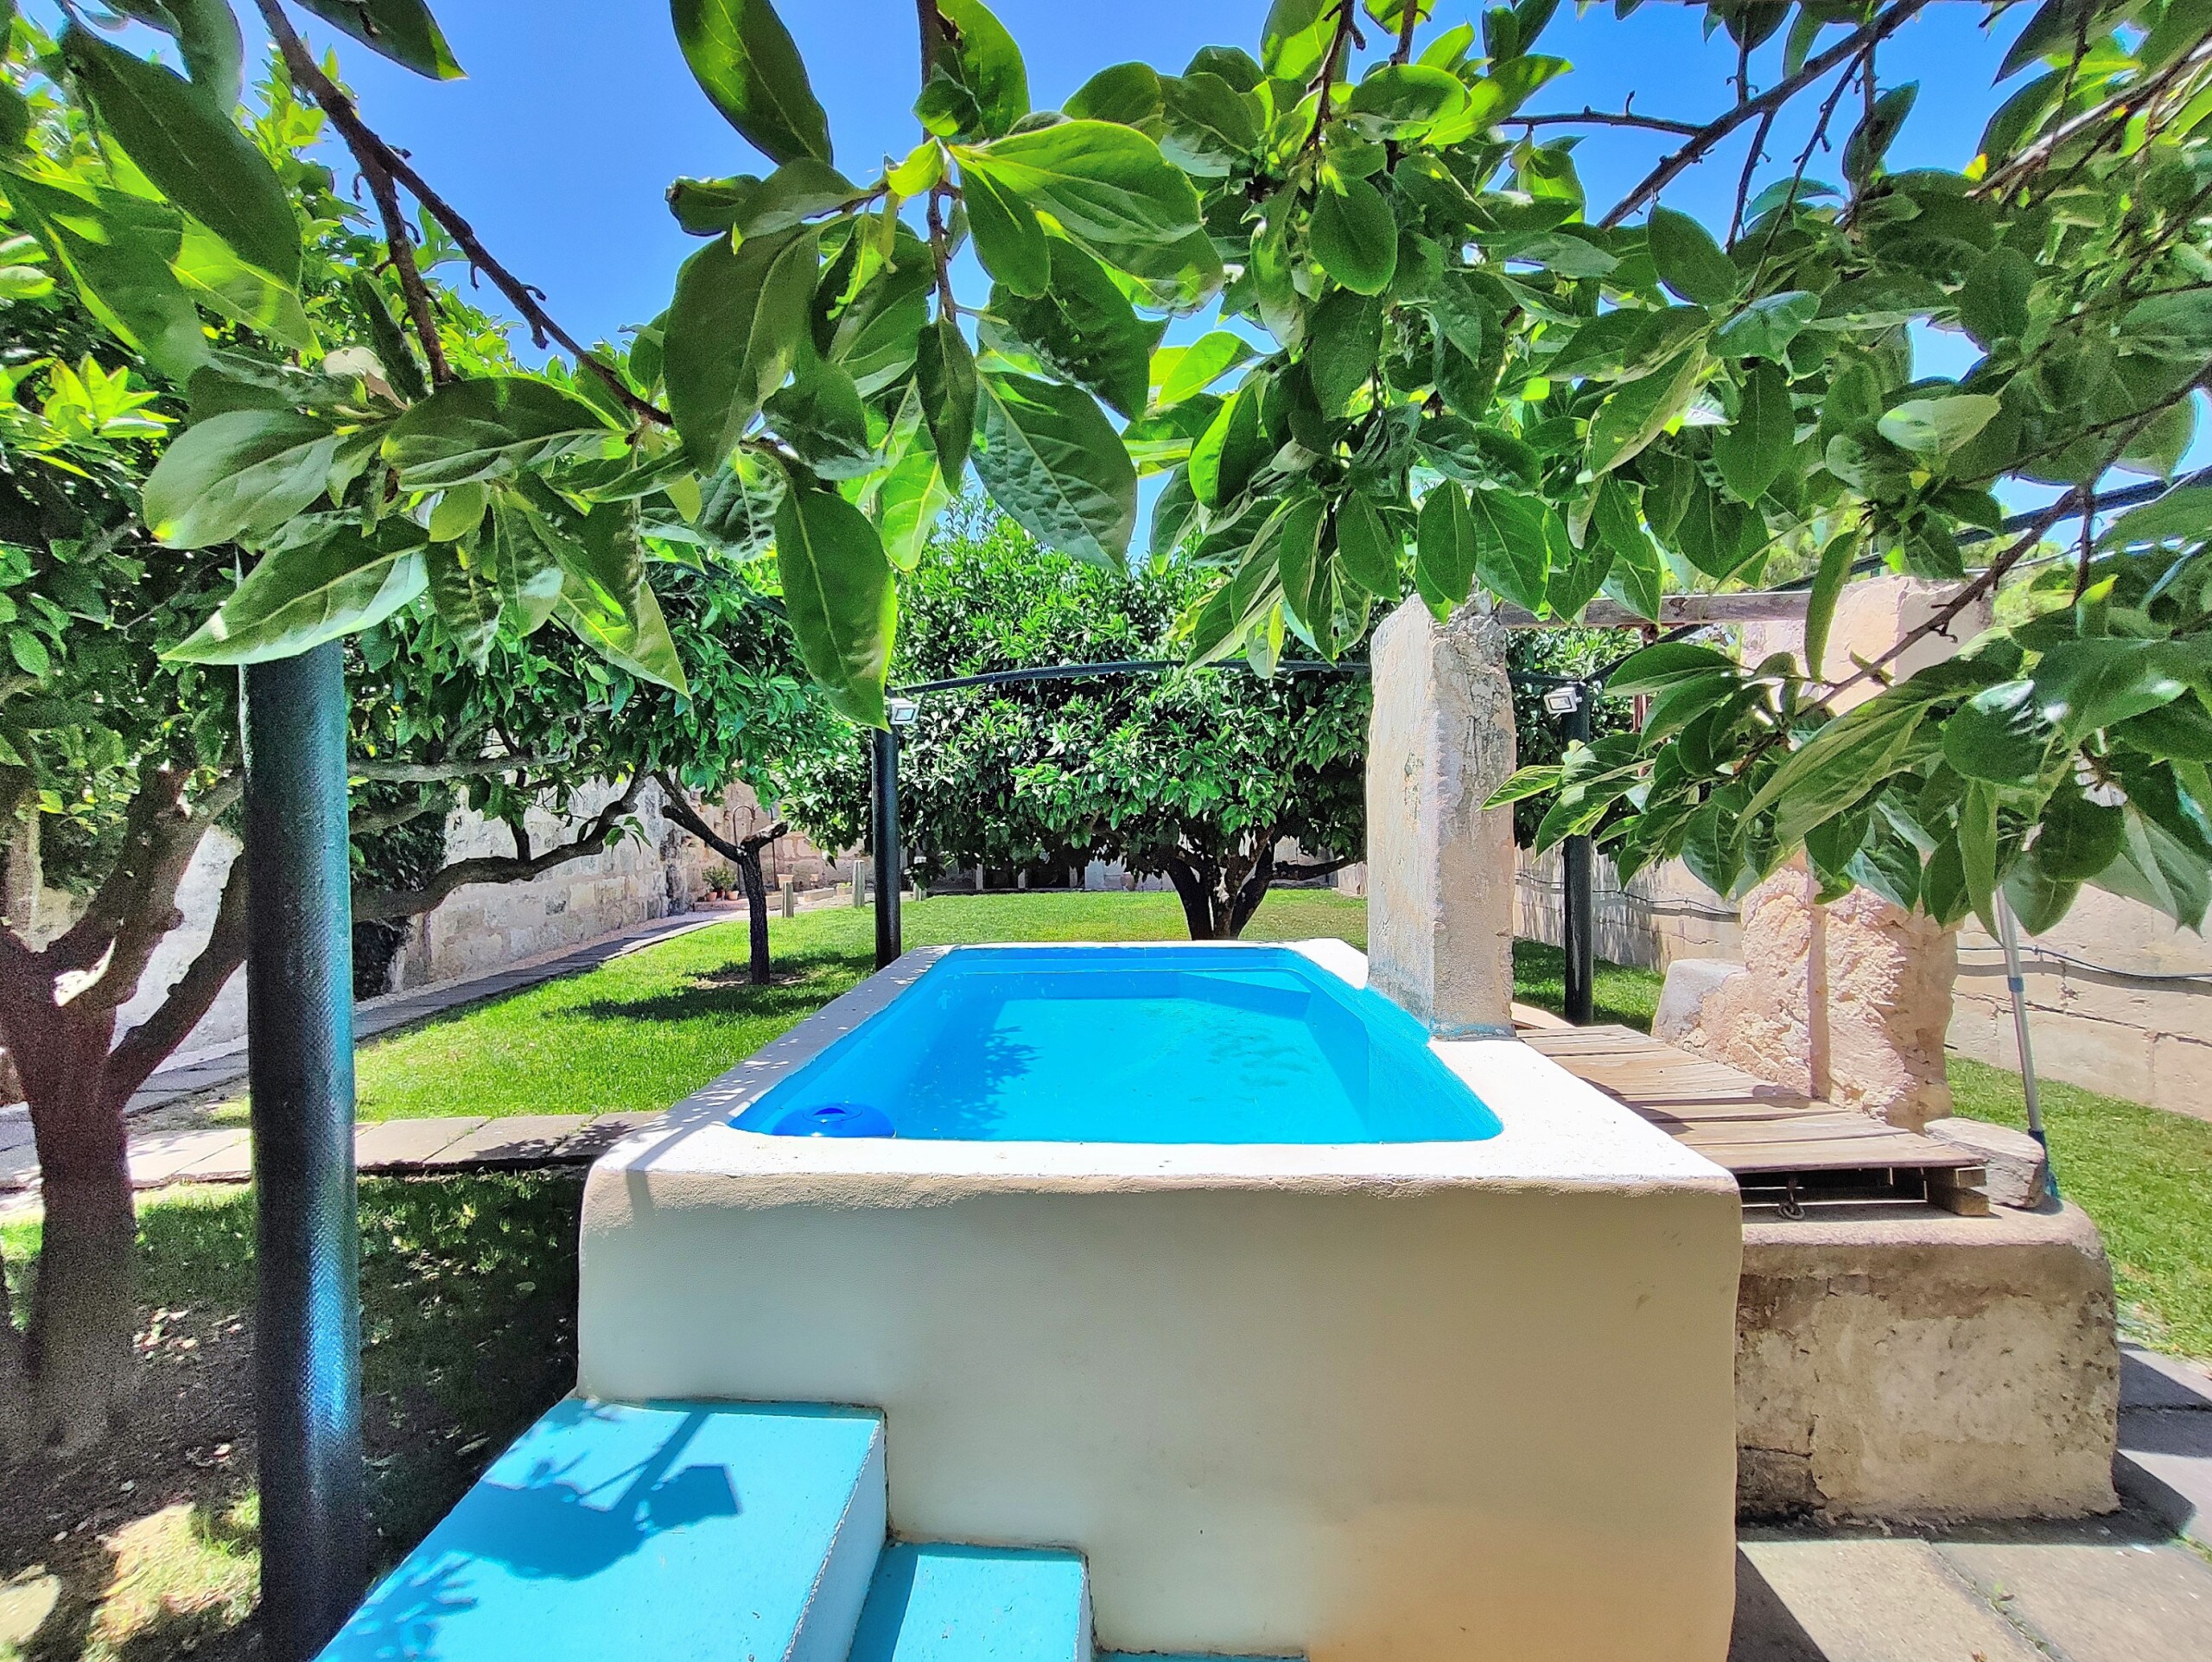 Traditional garden with traditional swimming pool (safareig)